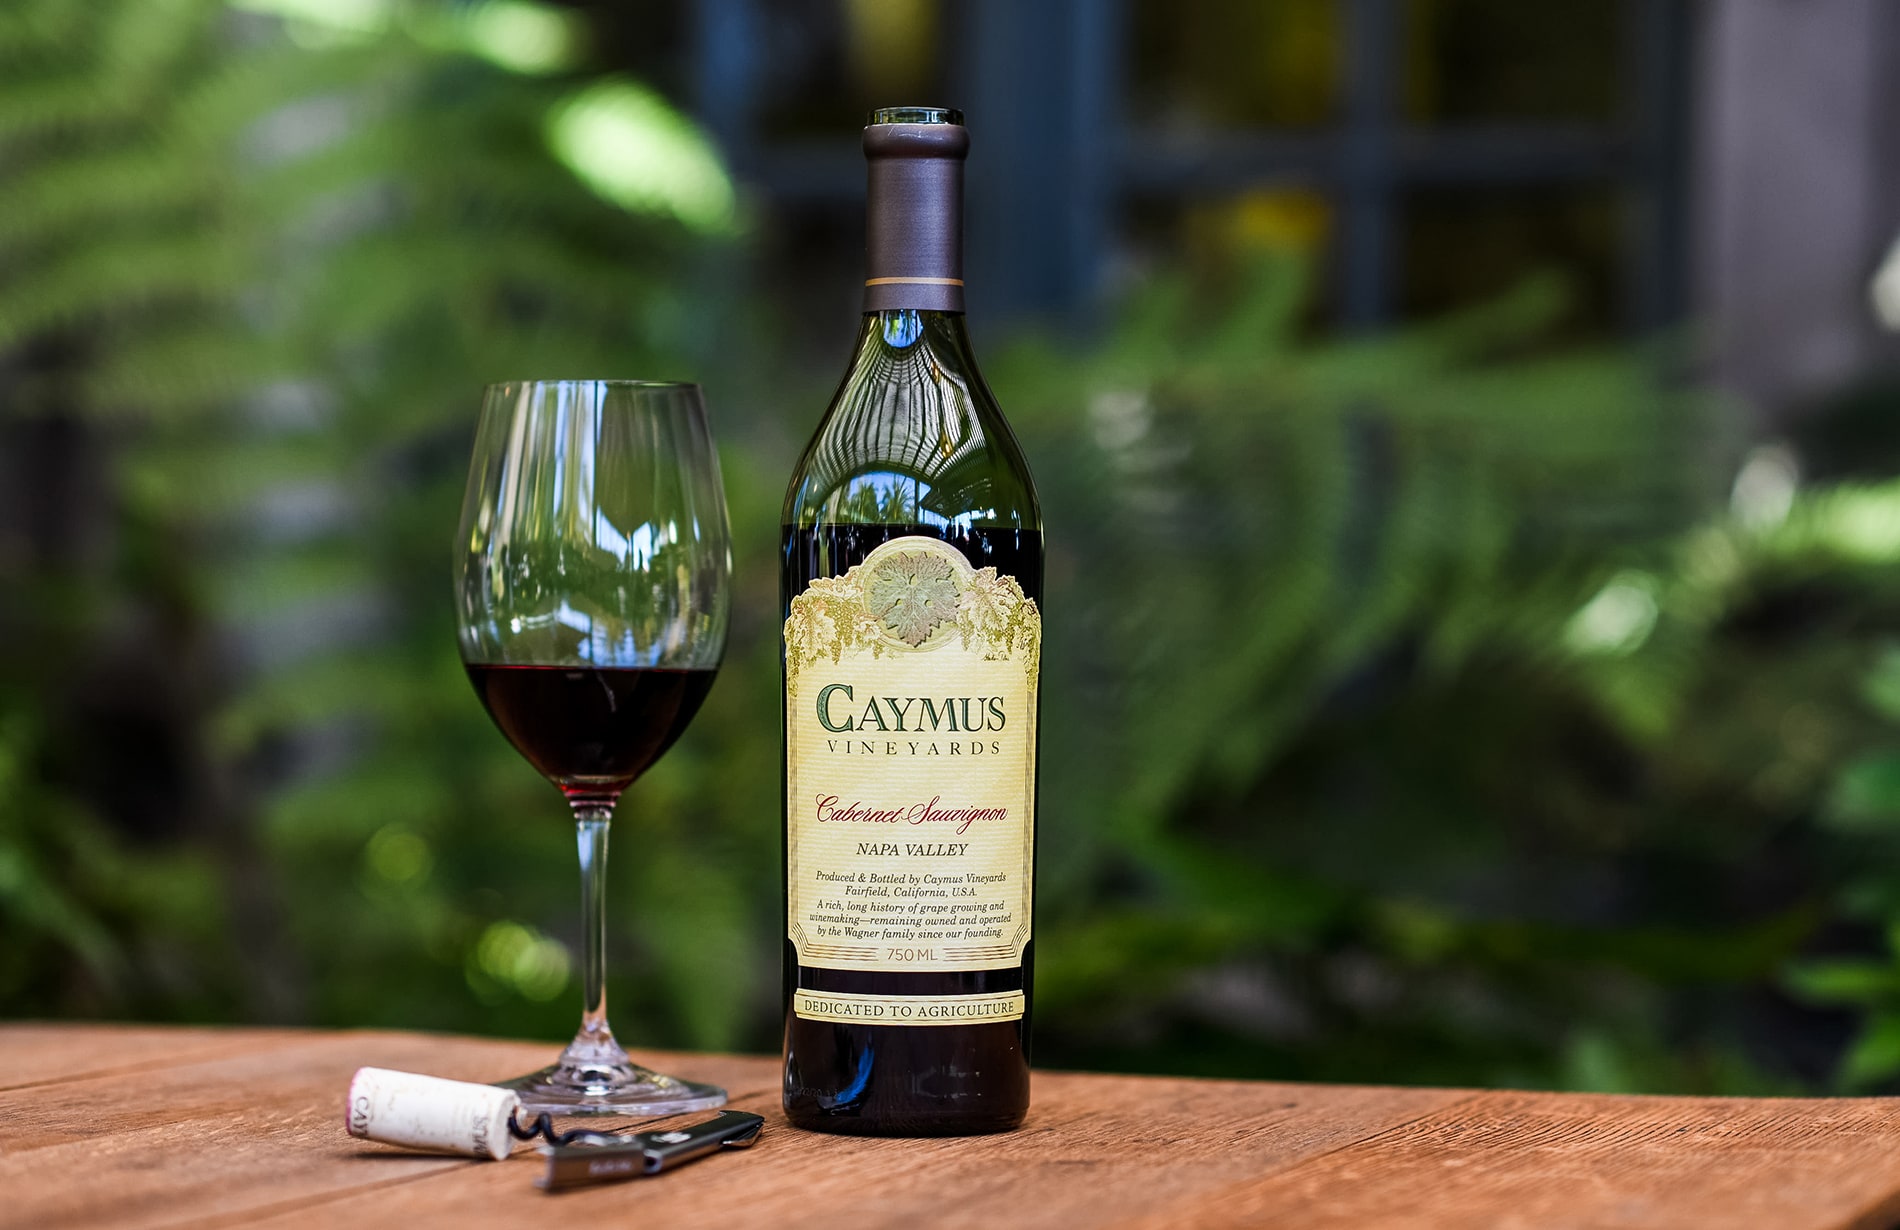 Bottle of Caymus Cabernet Sauvignon beside glass of wine